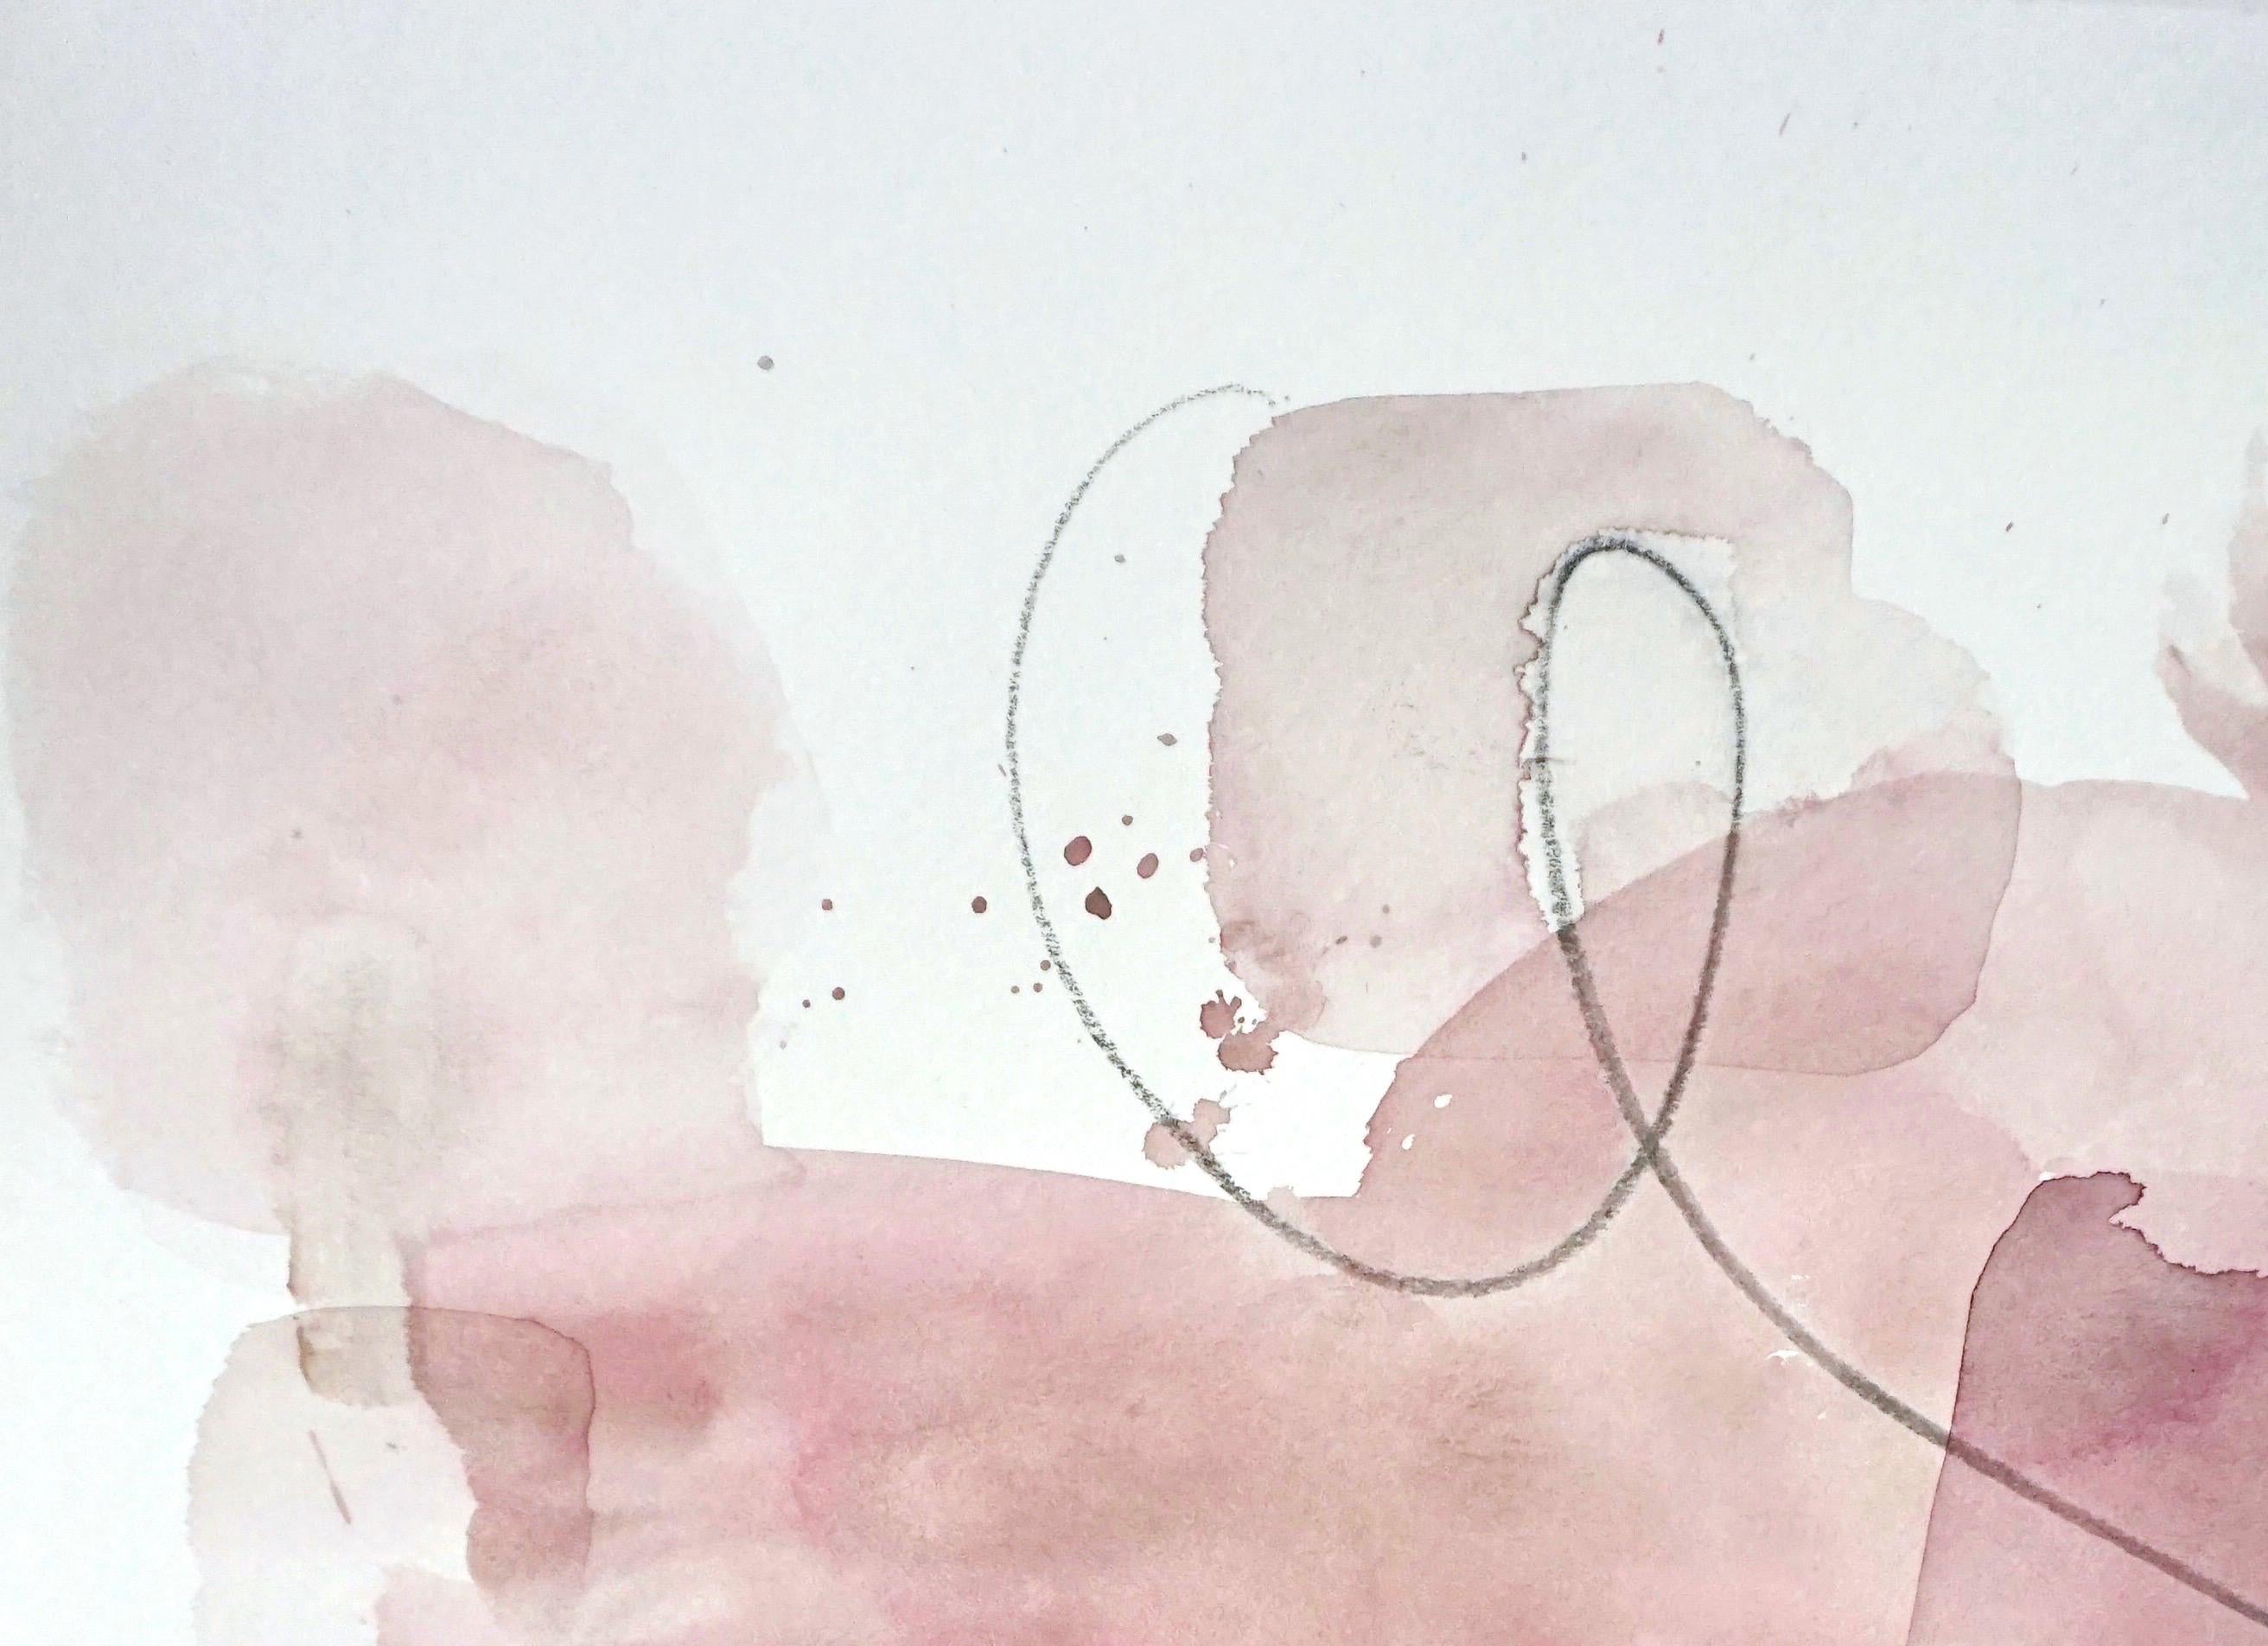 Nuance, pastel pink abstract watercolor painting on archival paper - Painting by Lisa Fellerson